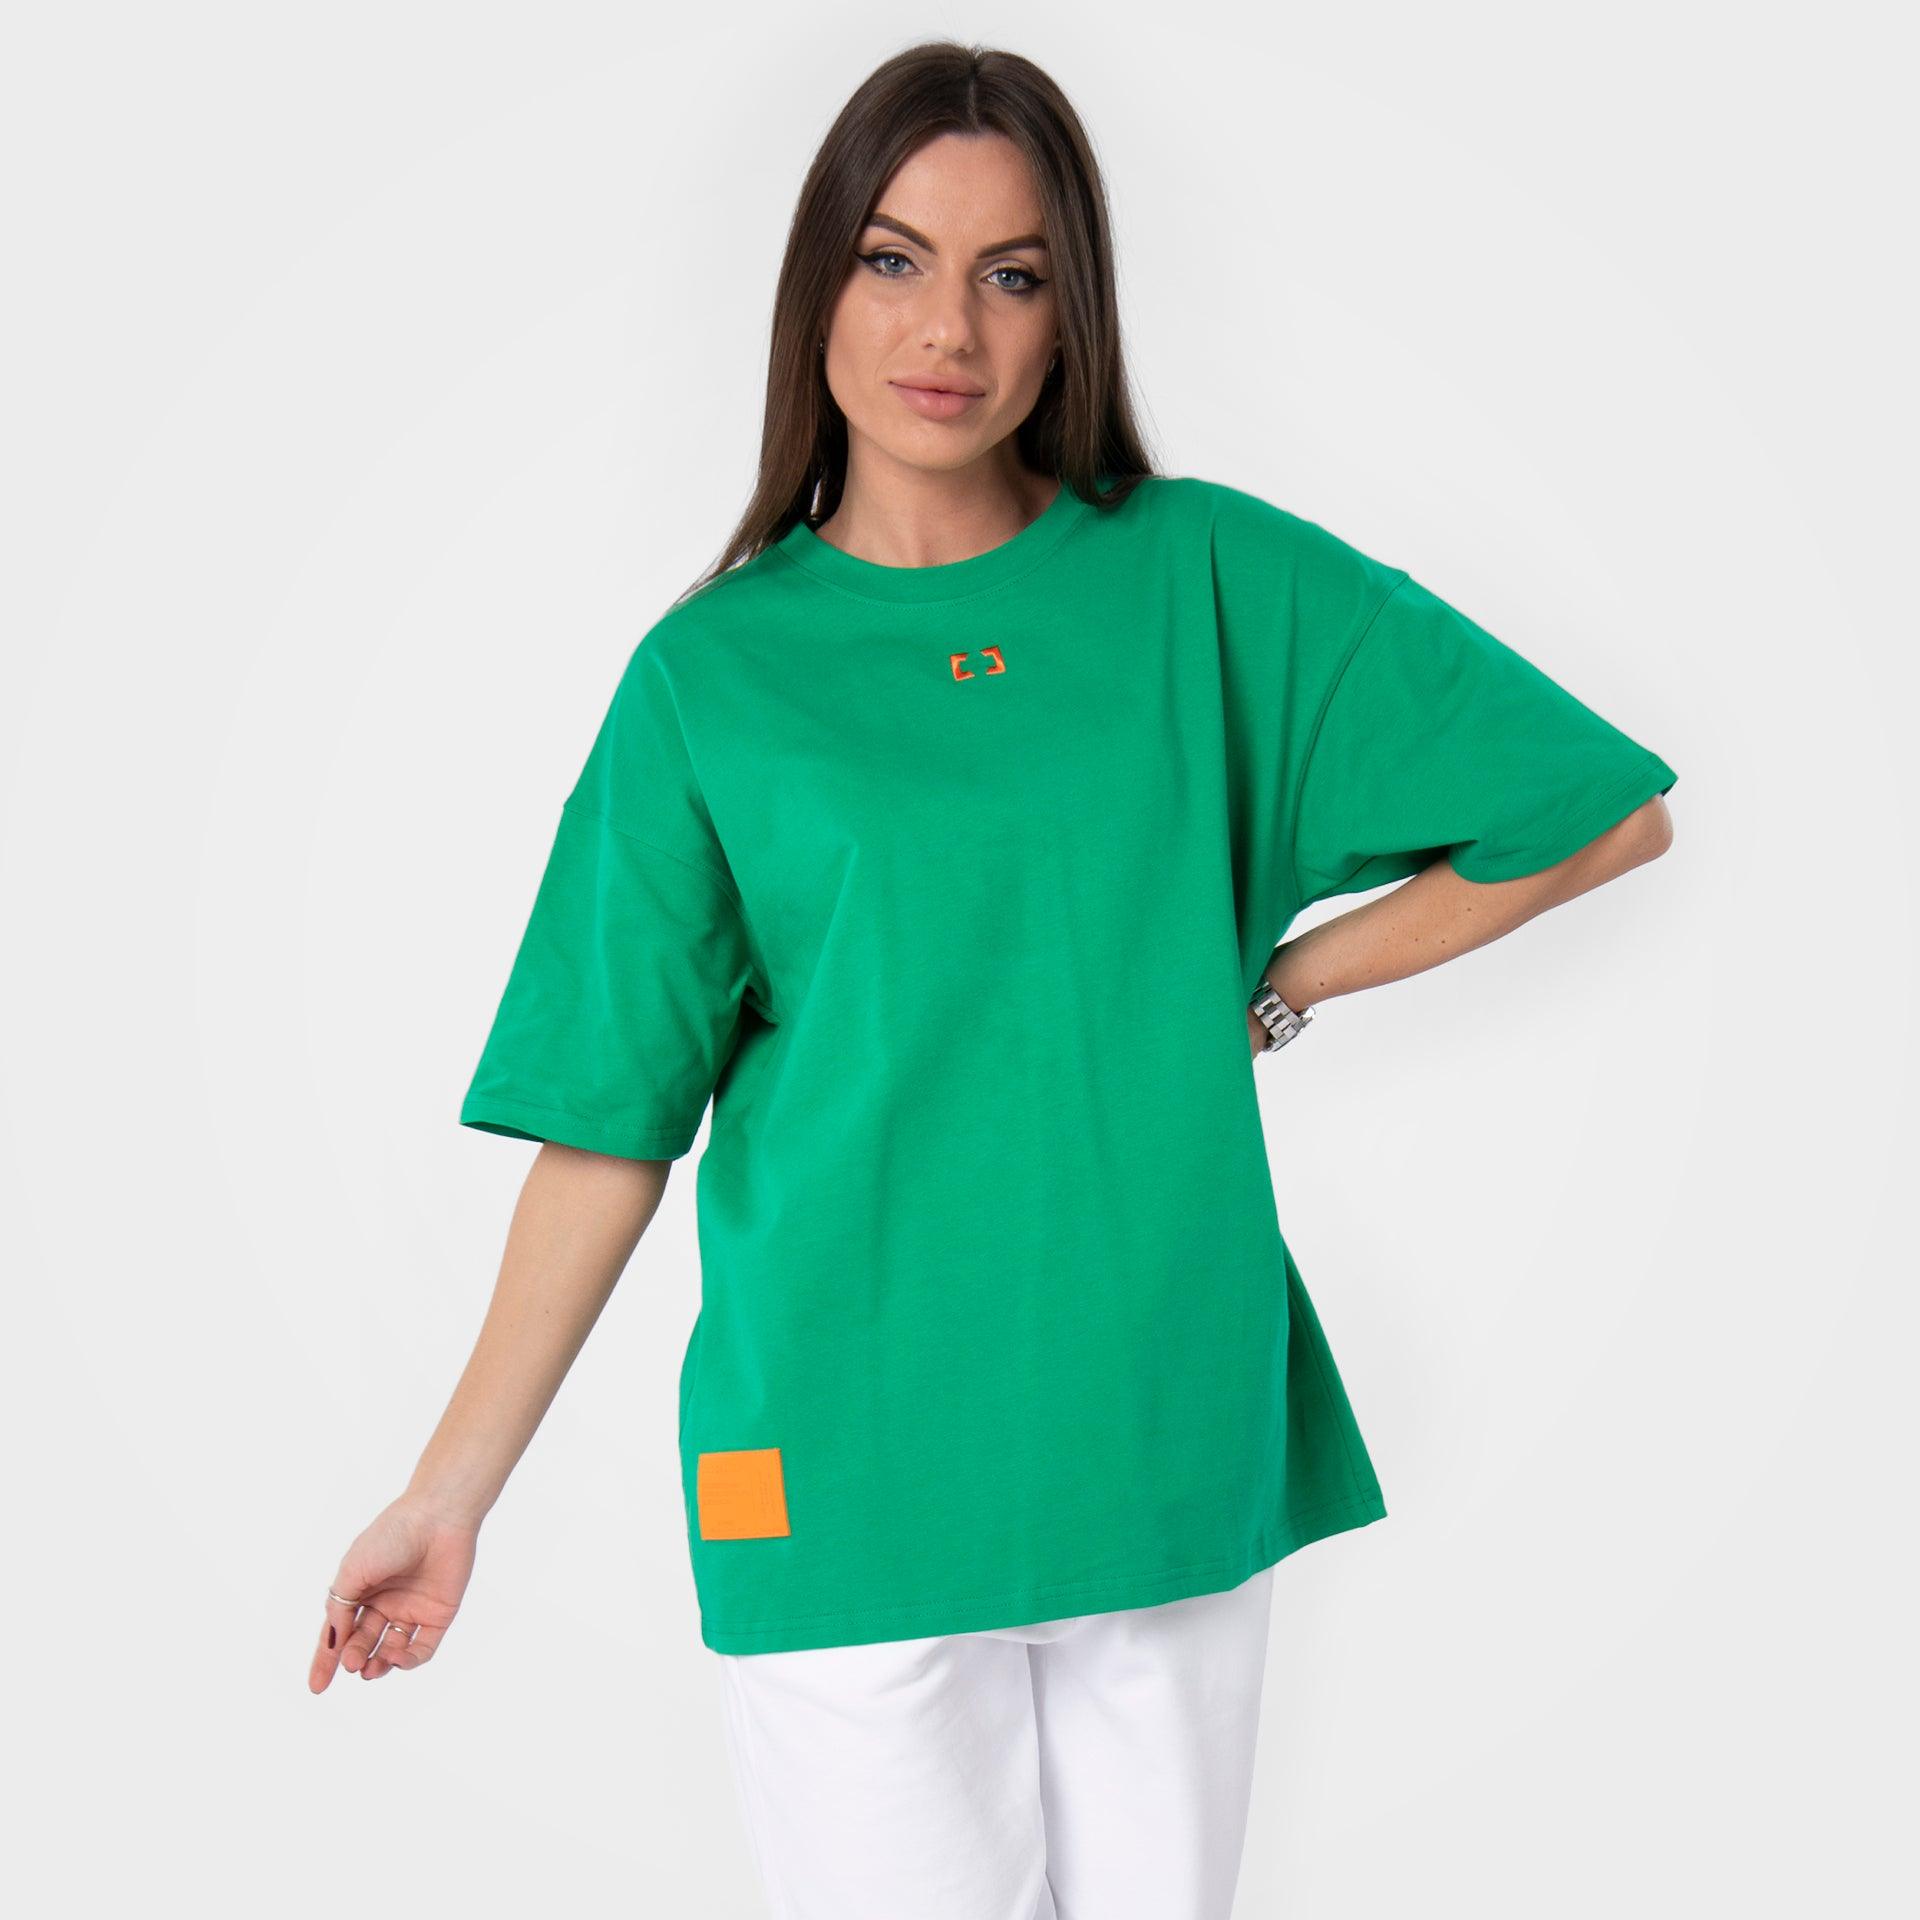 Green T-shirt with a Graphic and Sentence From Arc Design